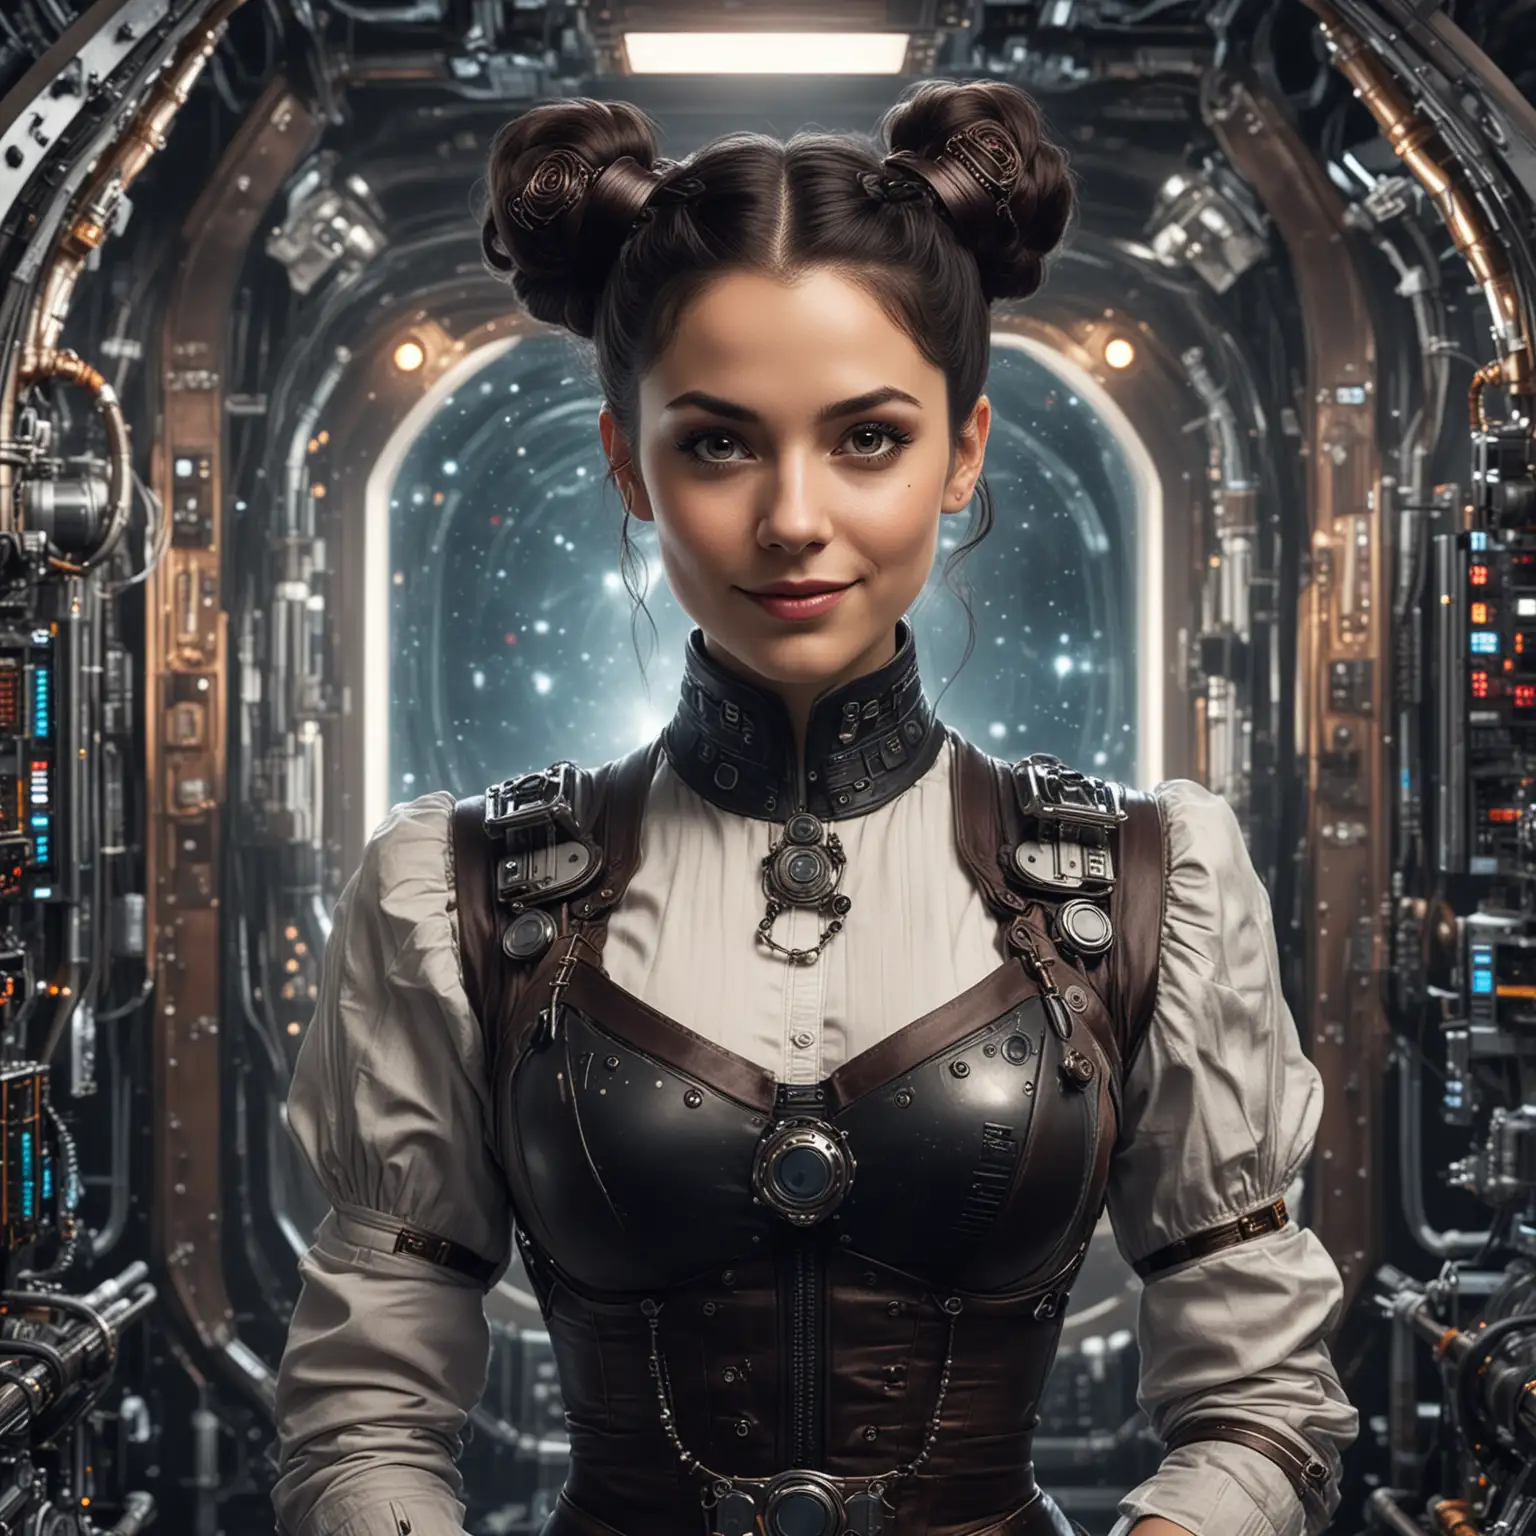 A 35 year old very futuristic steampunk Victorian lady, dark hair in space-buns, petite, English-rose face, upgraded in the far future, stood in front of a quantum computer . She has a wry smile and a confident look